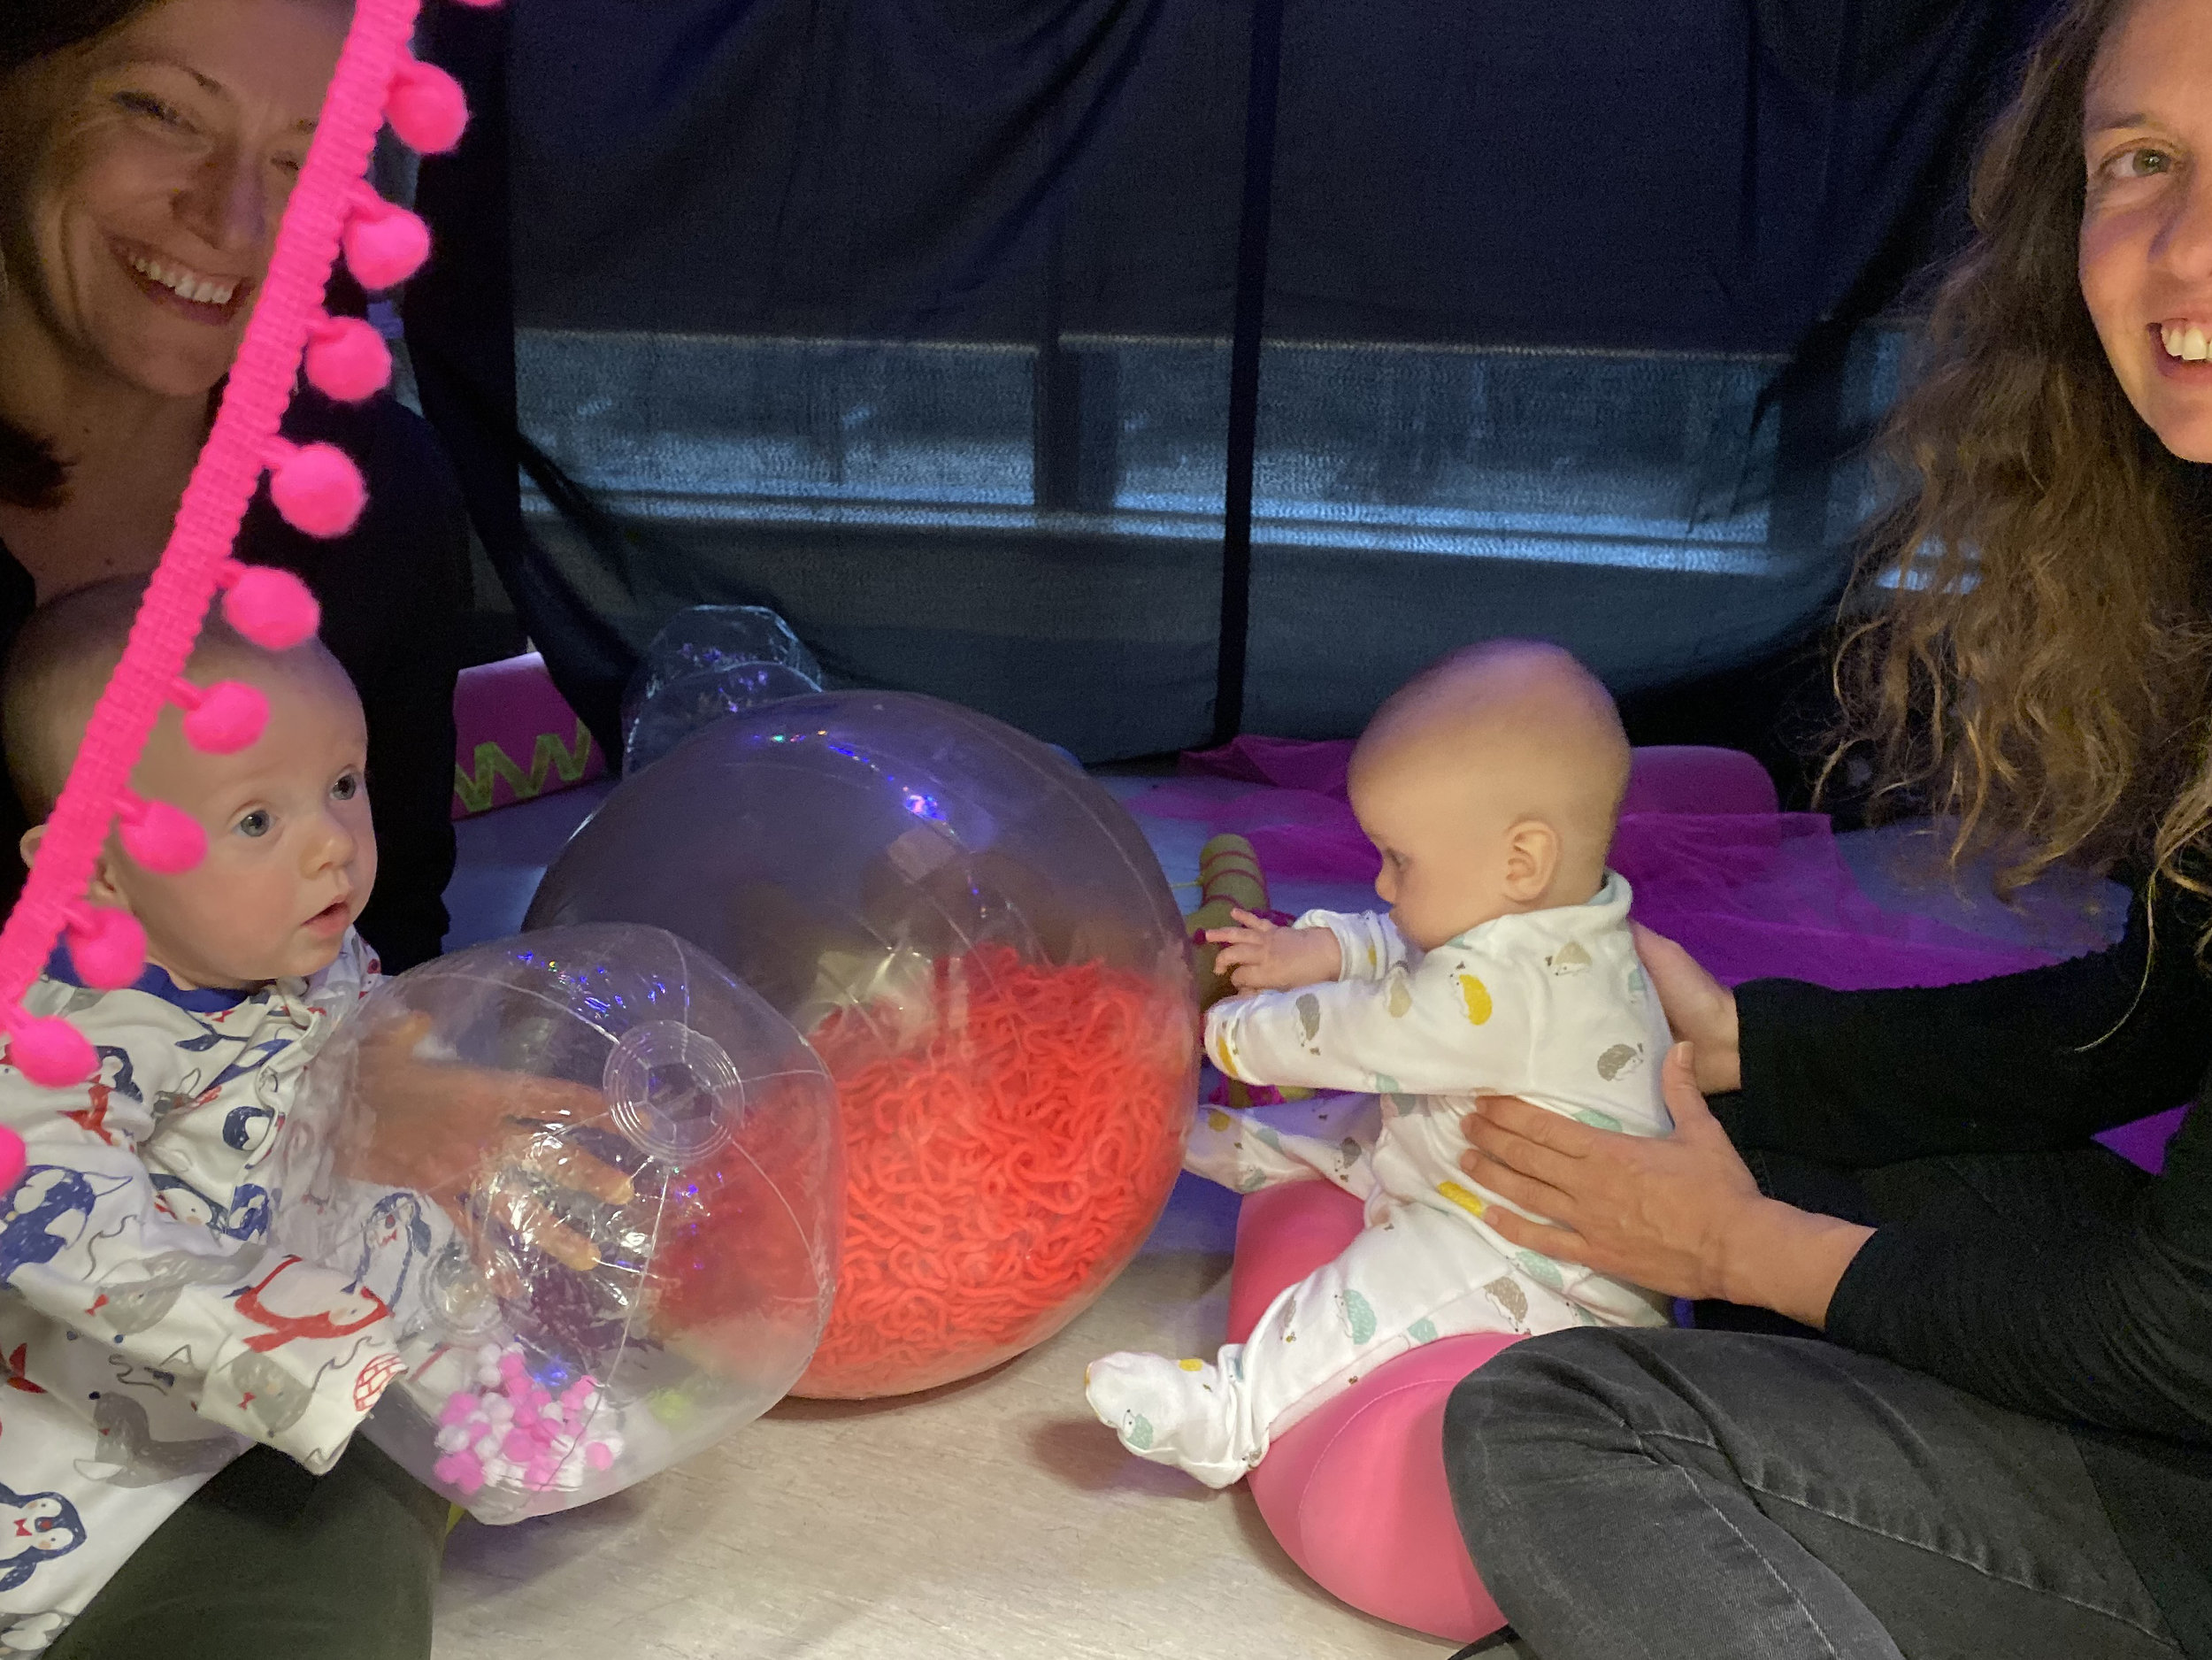 Babies love giant organelles- Golgi and the nucleus are a hit with twin tots.